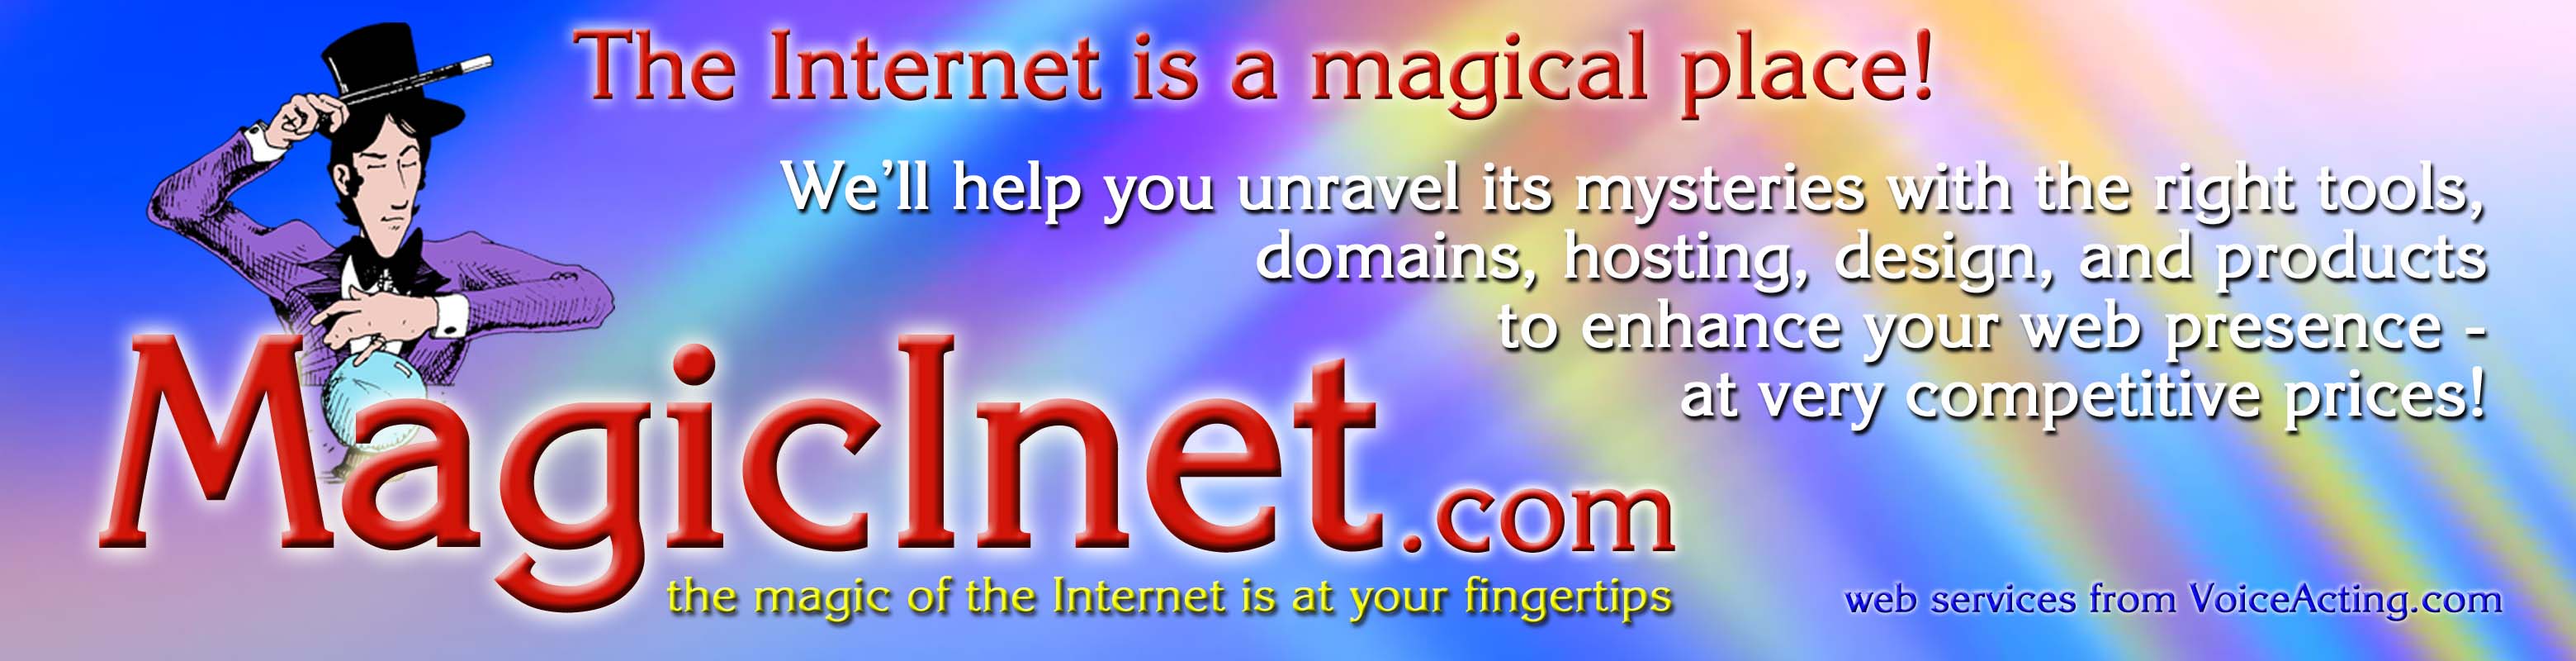 MagicInet - web hosting from VoiceActing.com